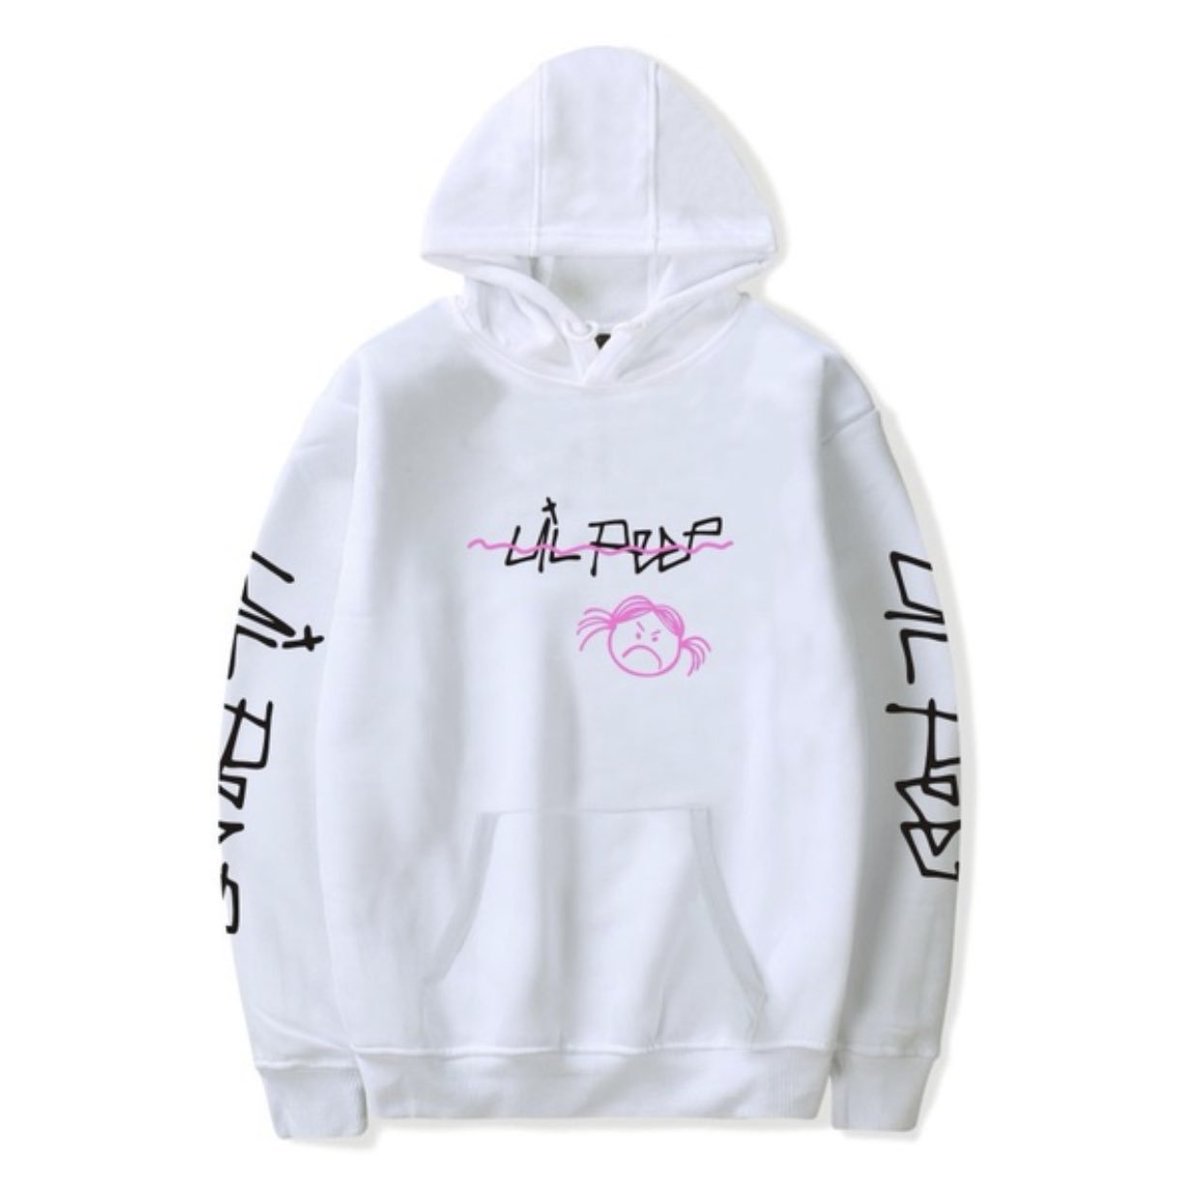 Xxxdopexxx Official Rip Lil Peep パーカー売ってます 5500円です Hiphop ラップ ヒップホップ Lilpeep Xxxtentacion ストリート アパレル ナイキ ラッパー ファッション ストリート系 ストリート系ファッション T Co 6lj5k37bmb